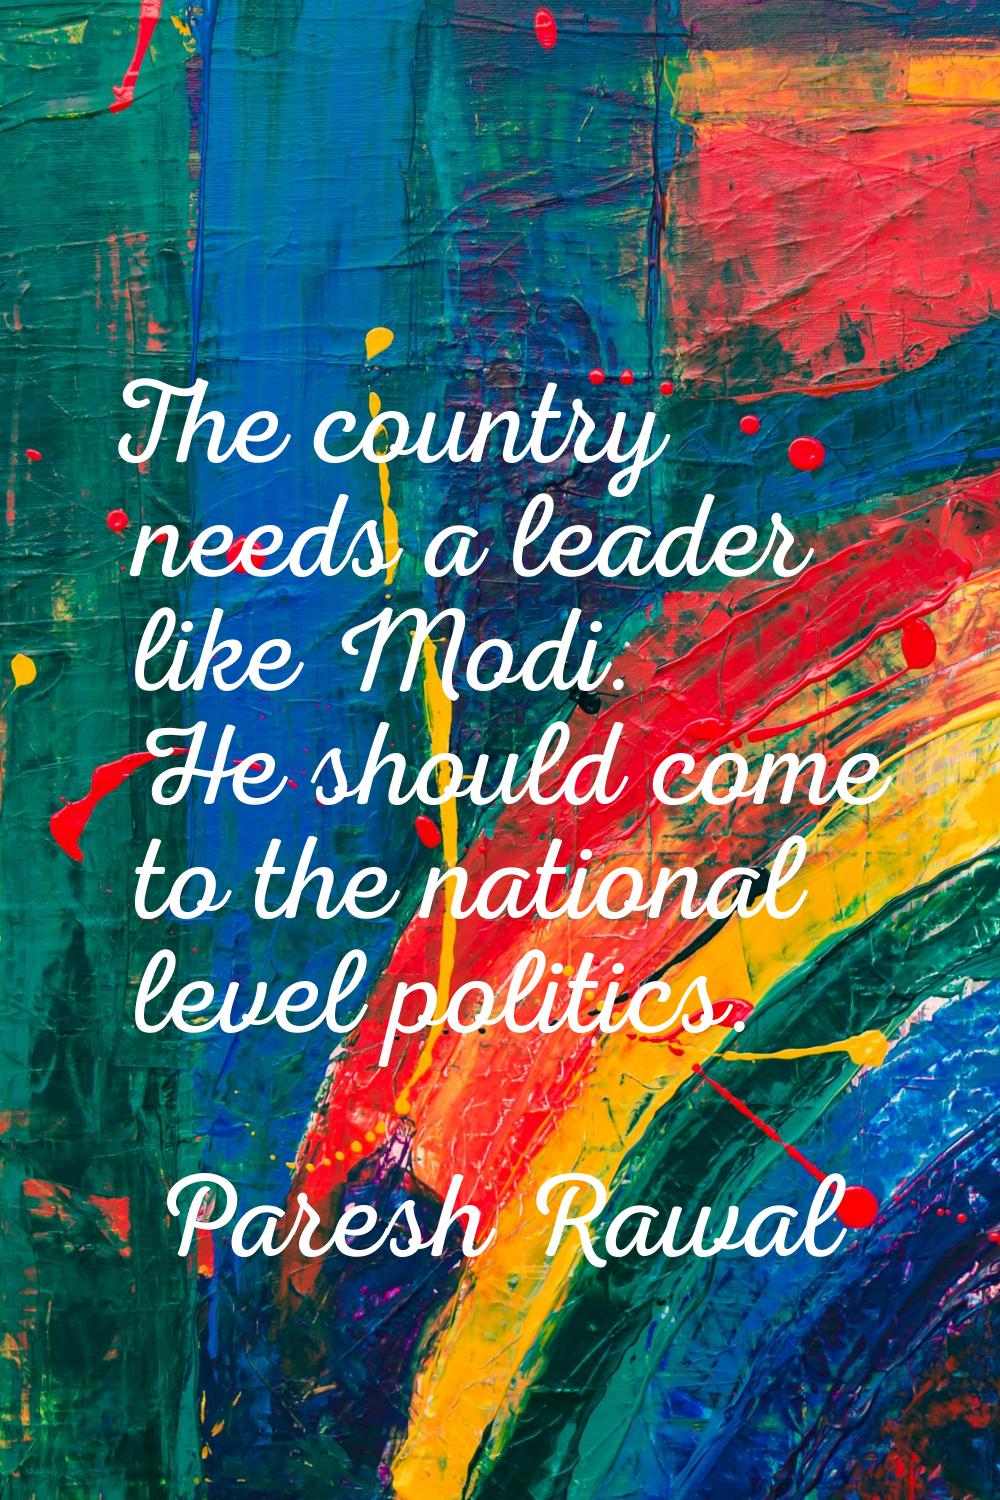 The country needs a leader like Modi. He should come to the national level politics.